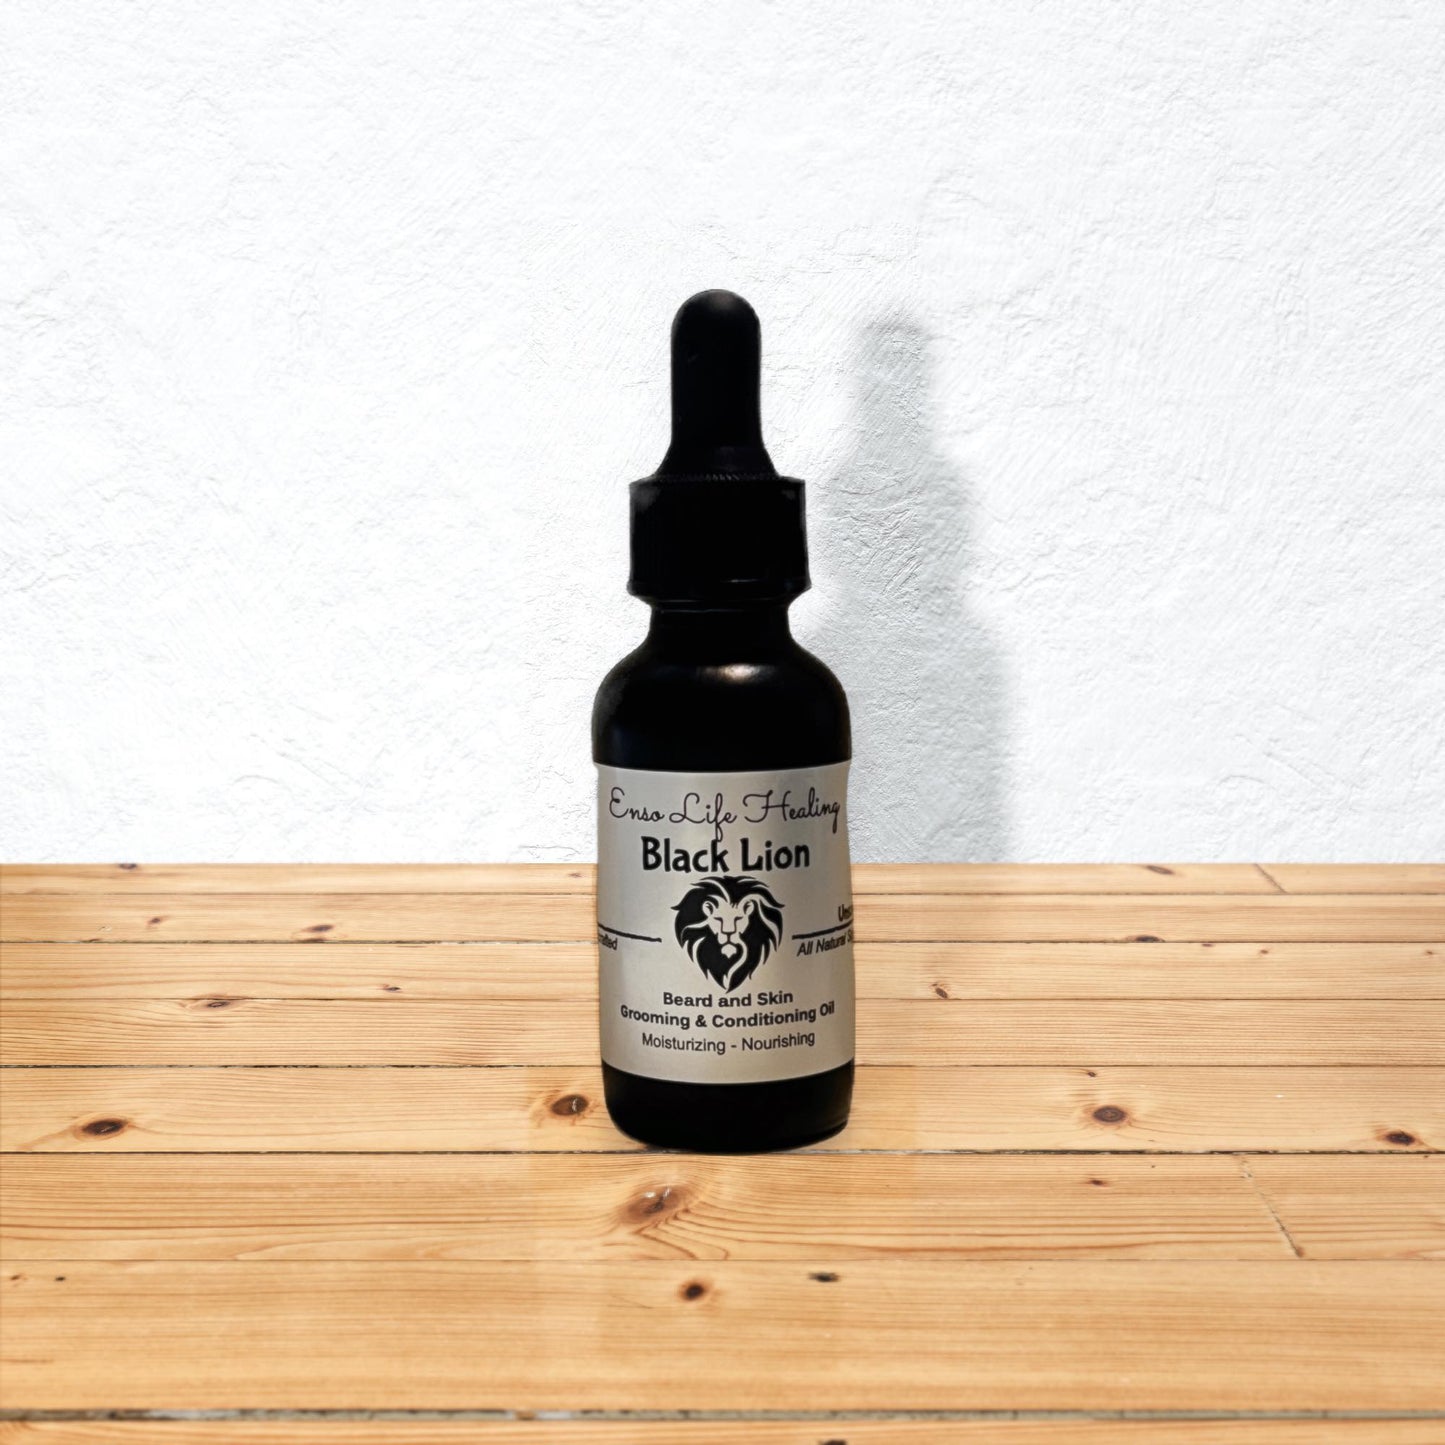 Black Lion Beard and Skin Grooming and Conditioning Oil